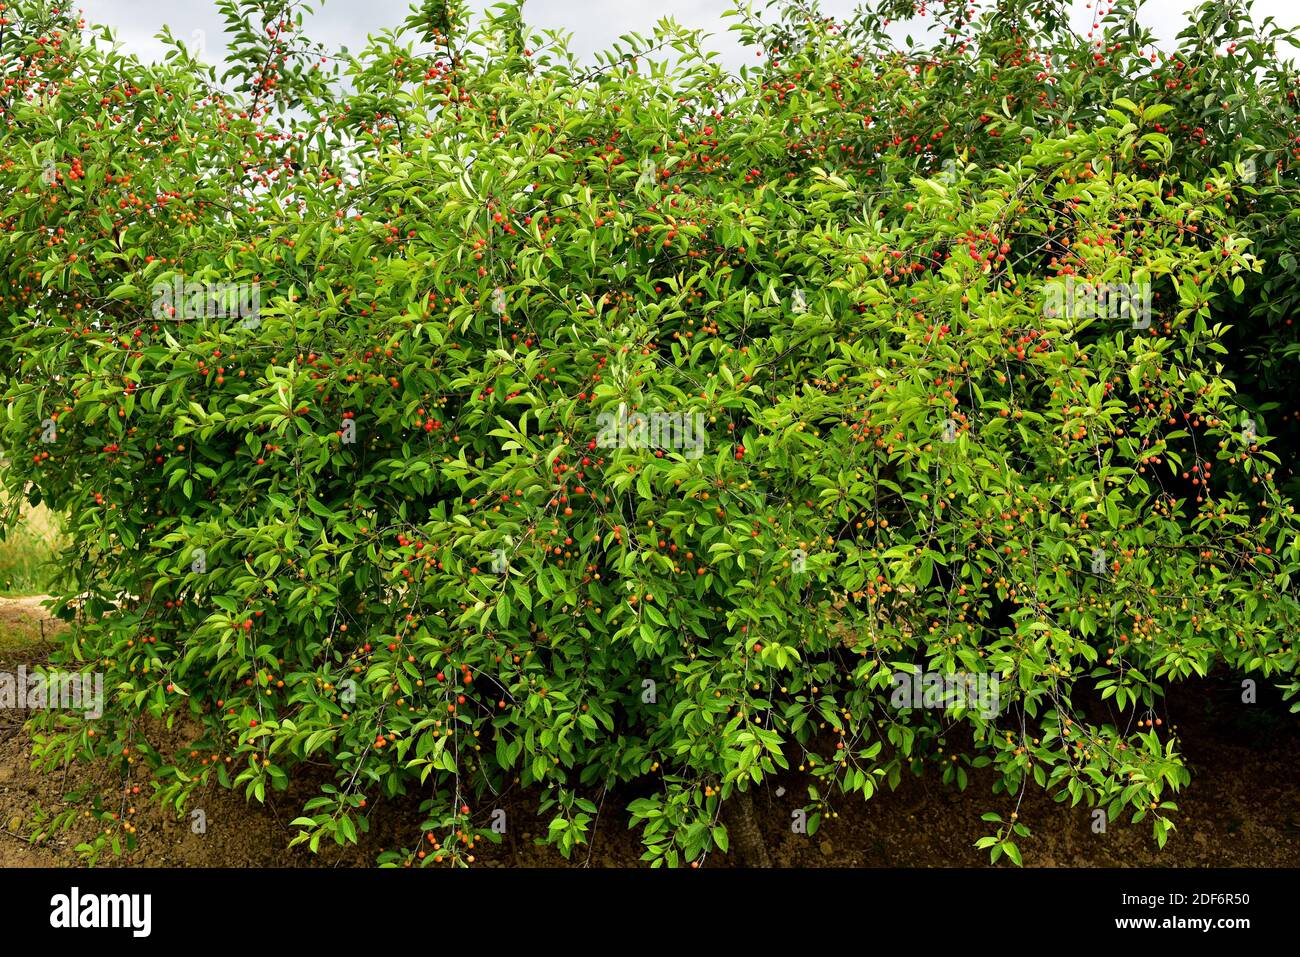 Sour cherry (Prunus cerasus) is a deciduous shrub native to Europe and western Asia. Its fruits (drupes) are edible but more acidic than sweet cherry Stock Photo